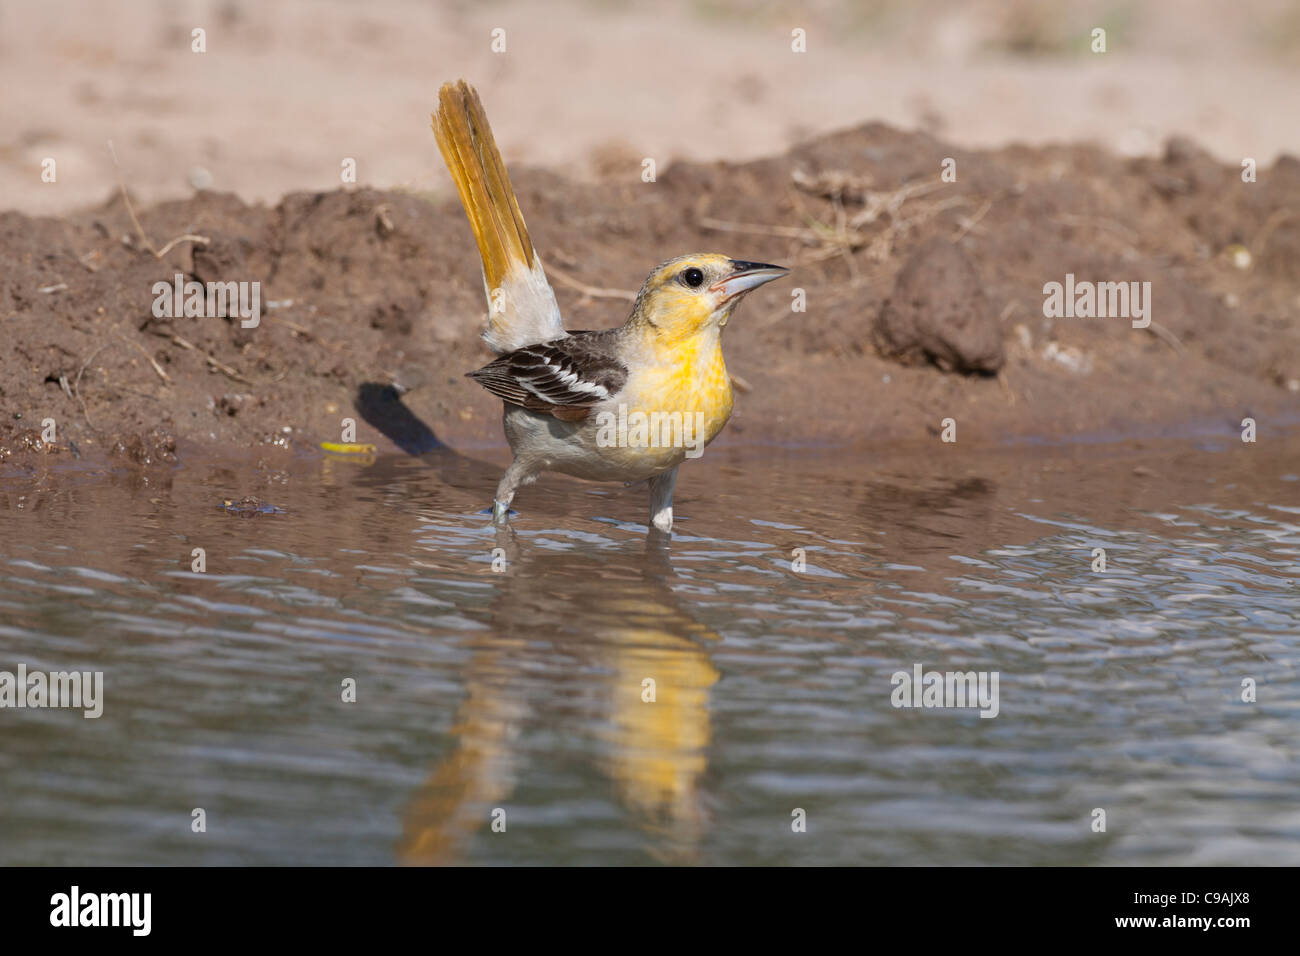 Female Bullock's Oriole, Icterus bullockii, trying to keep cool during a hot summer day on a South Texas Ranch. Stock Photo